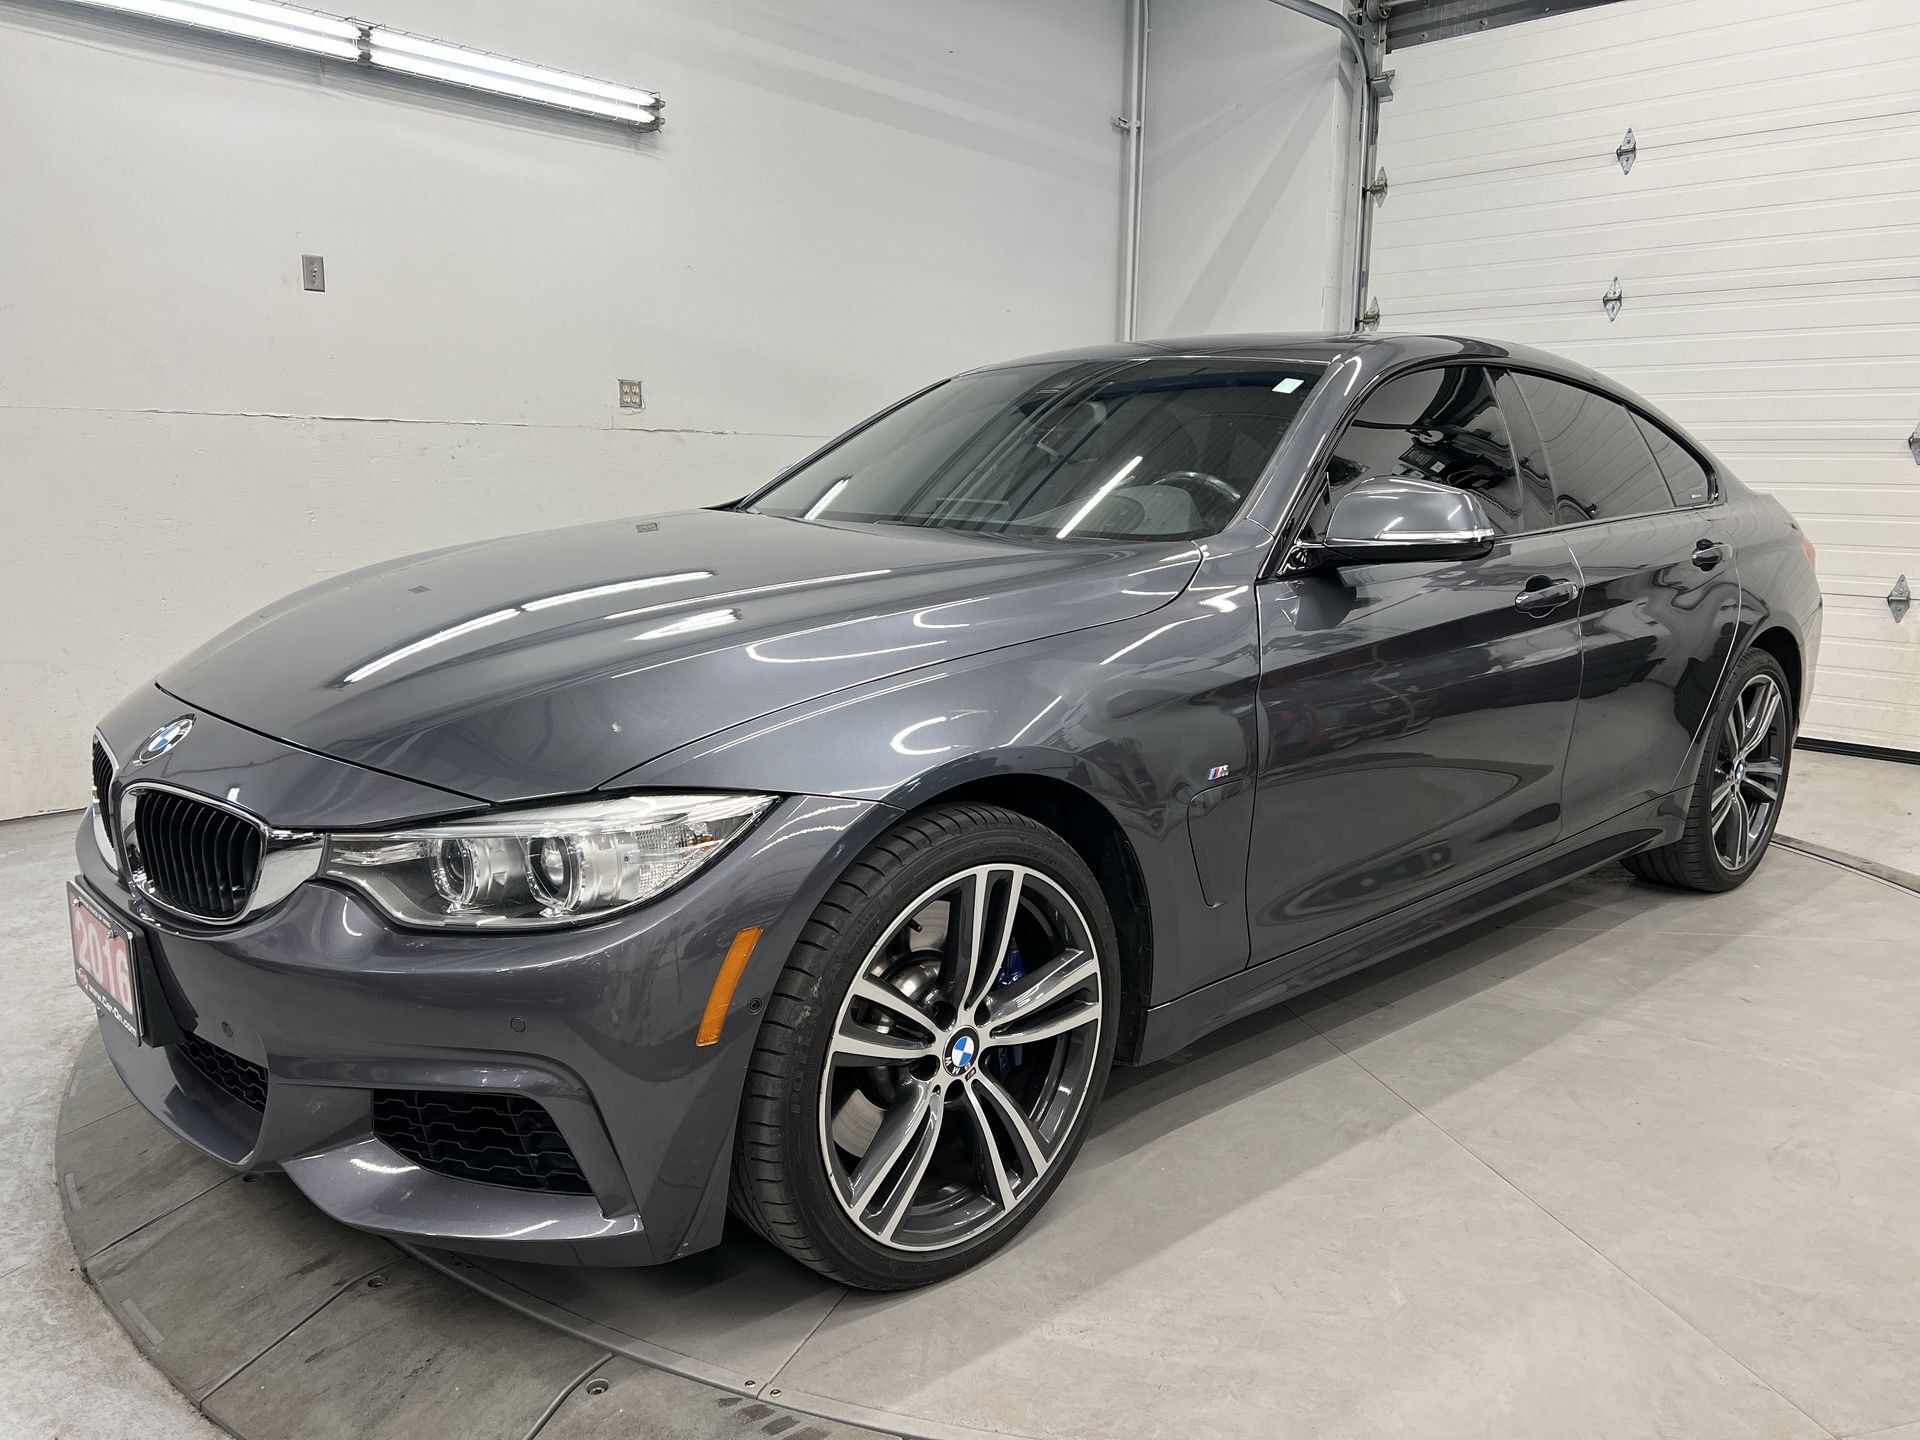 2016 BMW 4 Series 435I GRAN COUPE XDRIVE| M SPORT| SUNROOF| REAR CAM